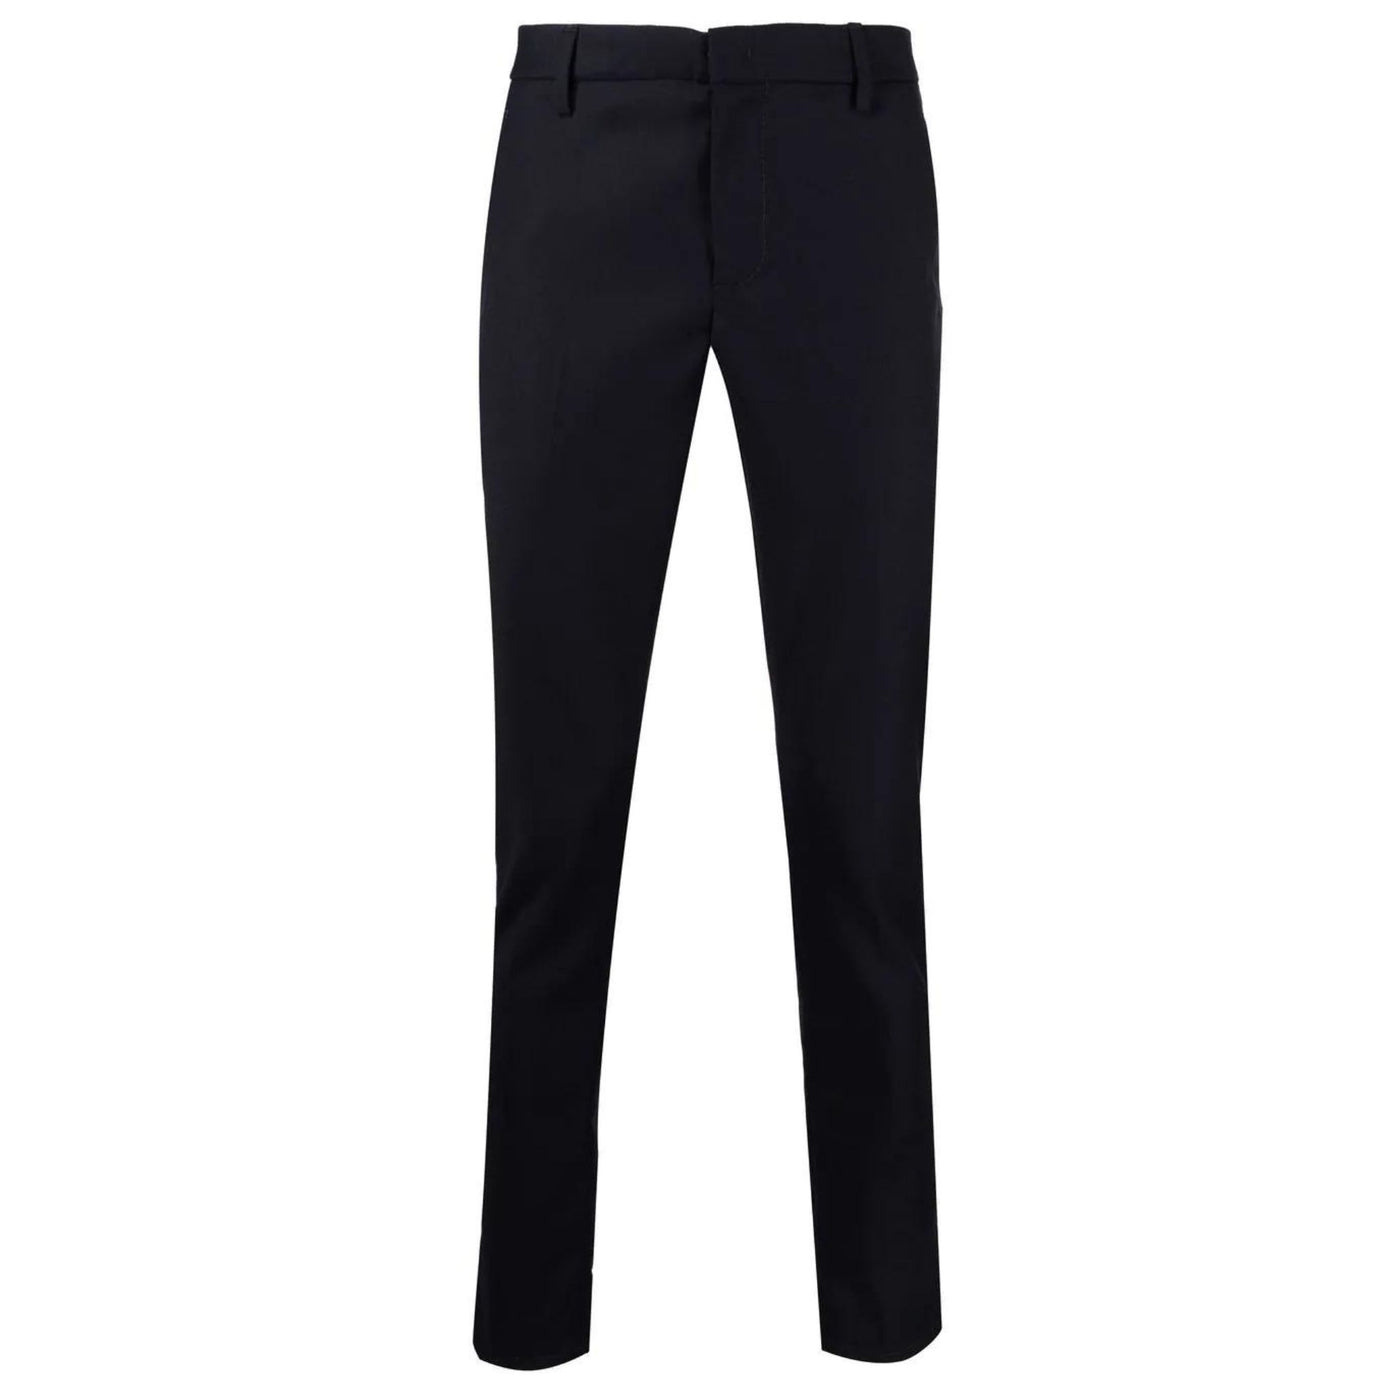 Skinny men's trousers with pockets